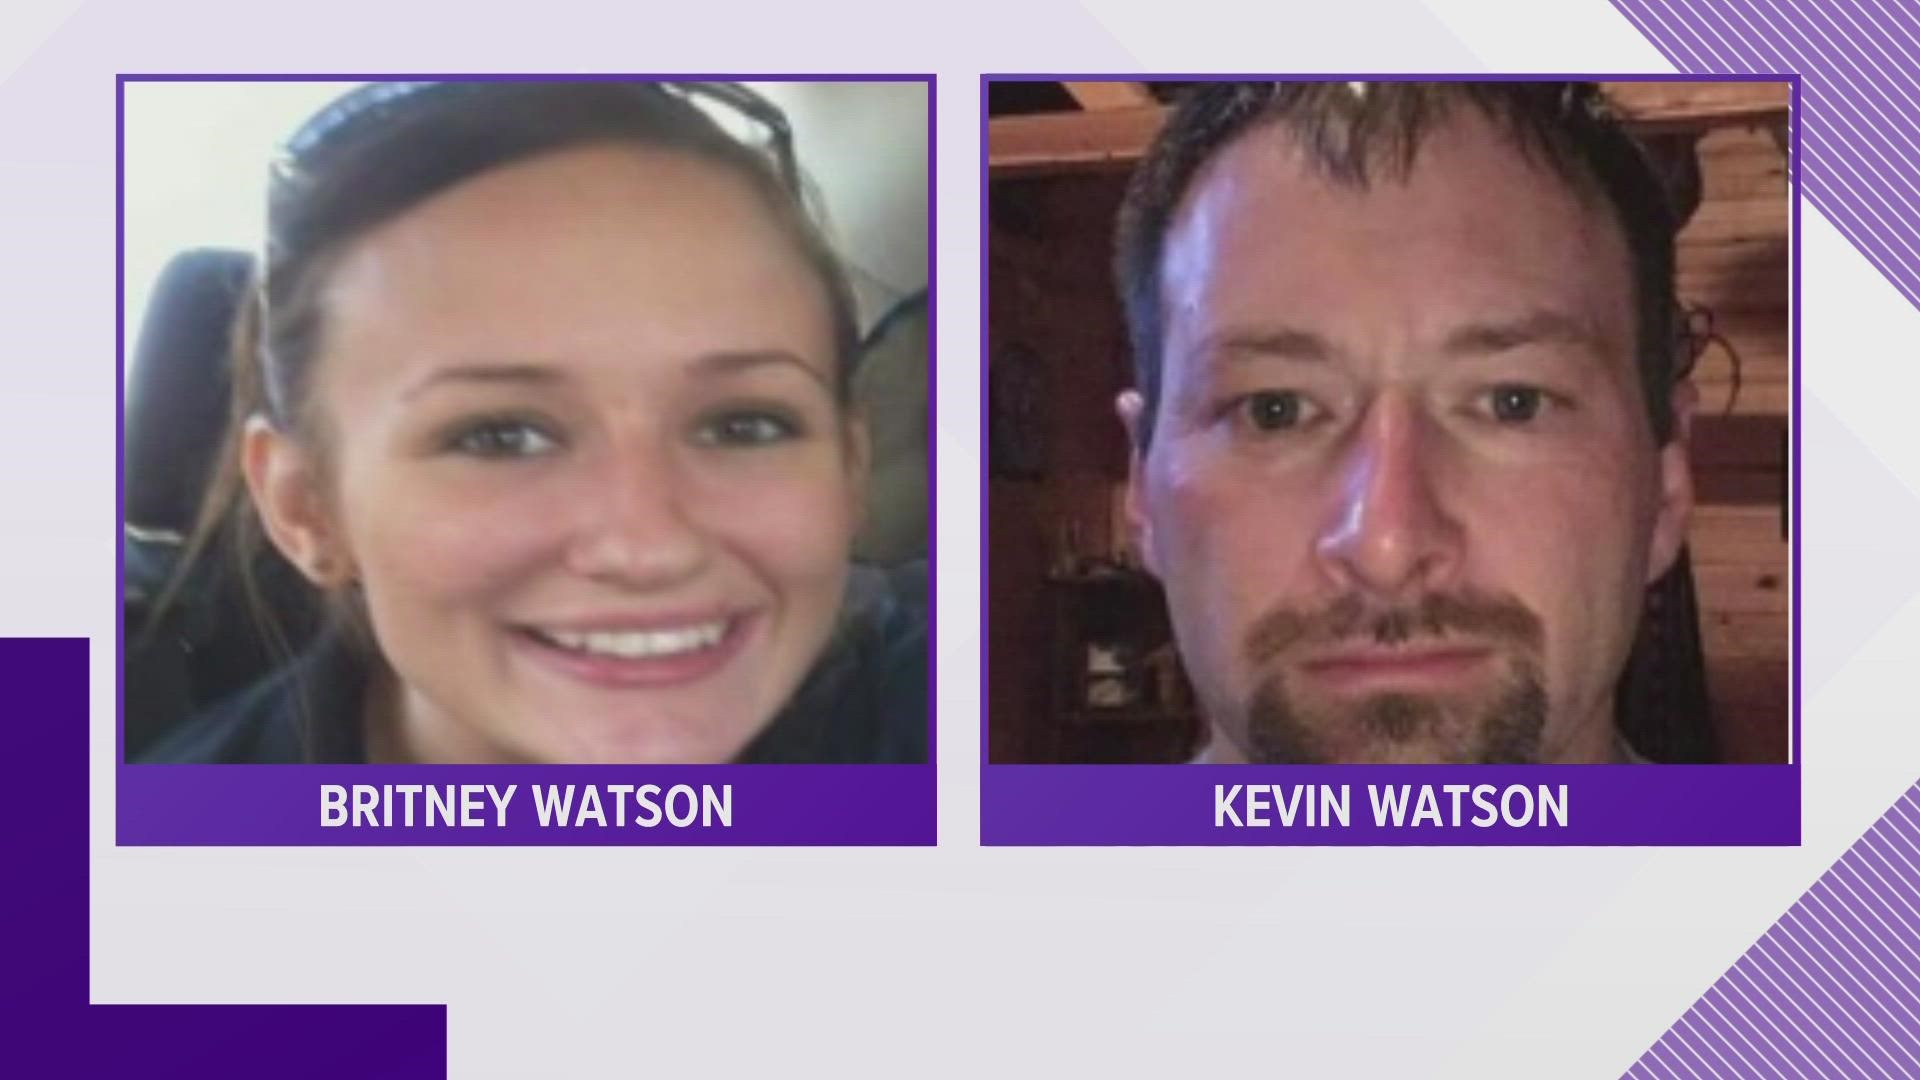 Britney Watson is believed to be dead, but positive identification has not been made, according to Haywood County Sheriff Billy Garrett Jr.